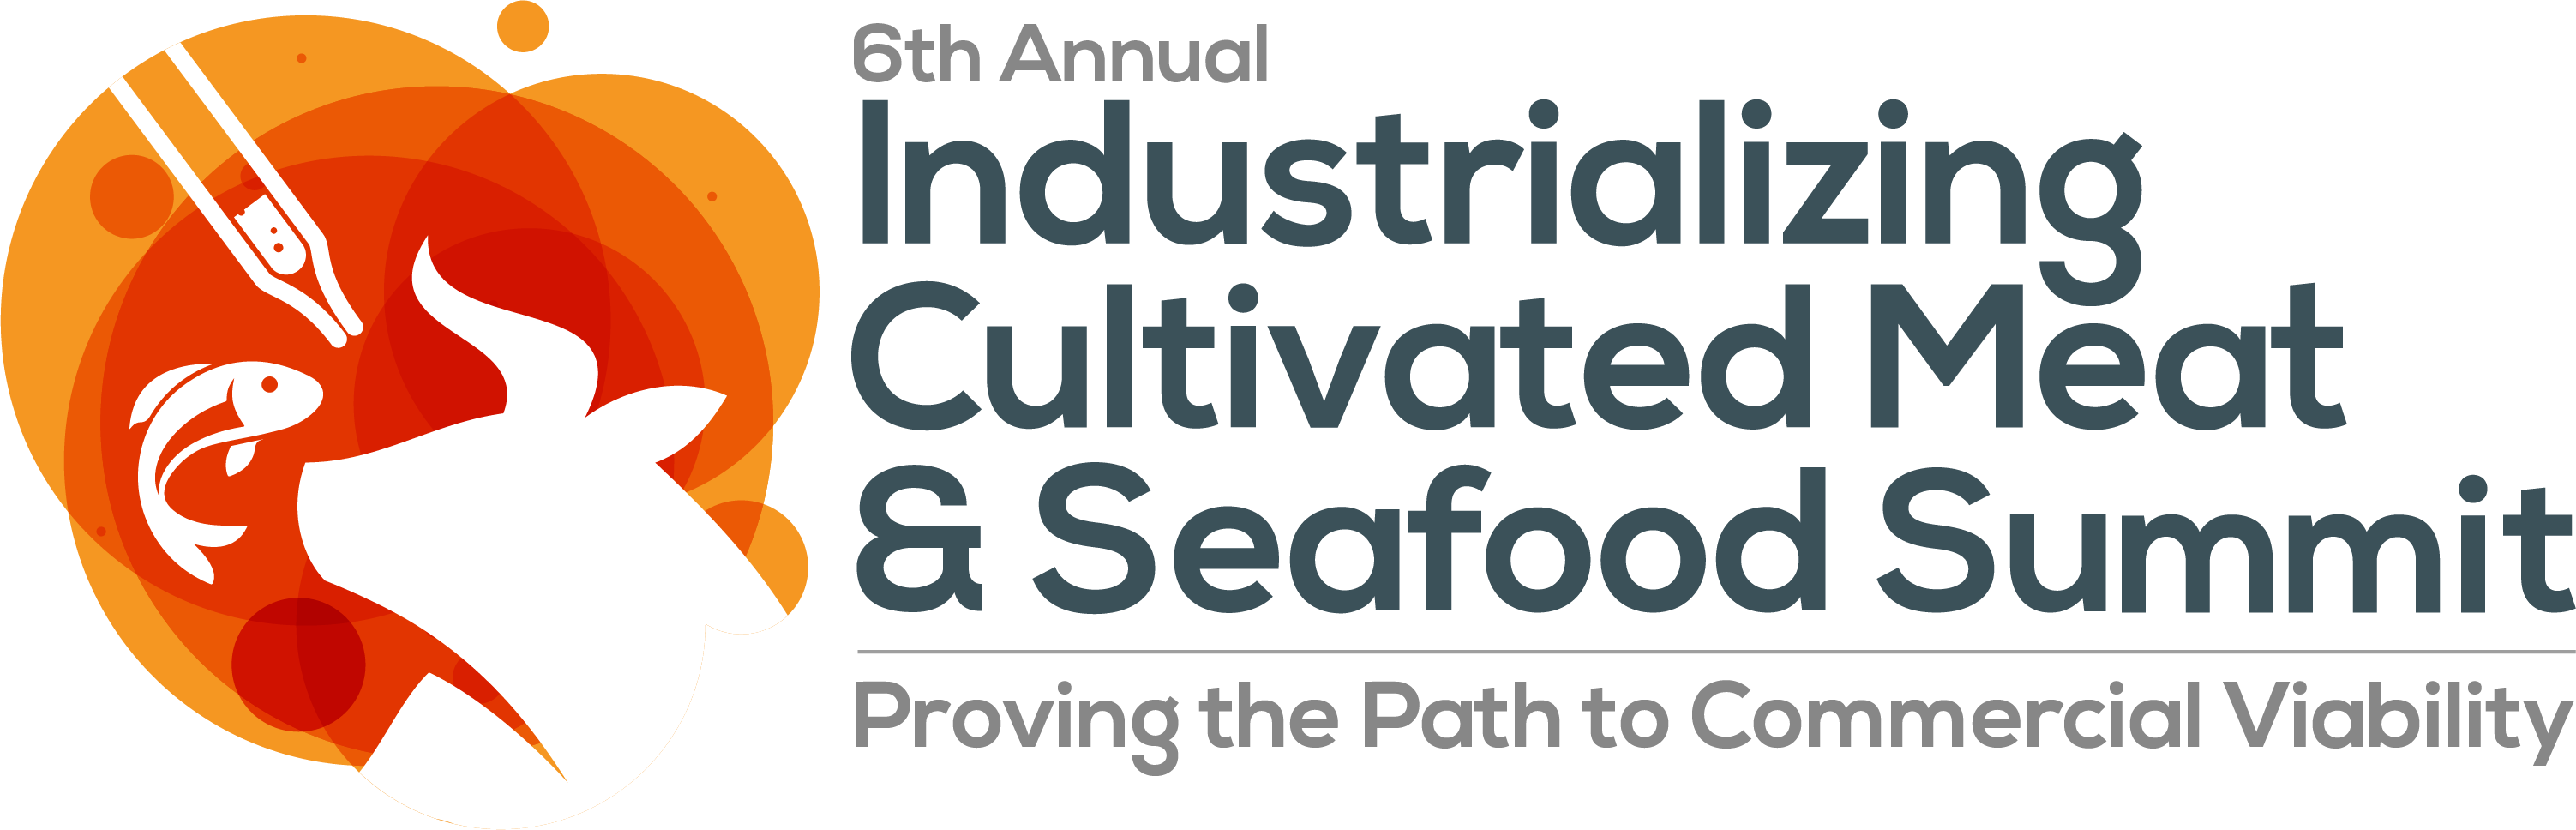 41588 – 6th Industrializing Cultivated Meat & Seafood Summit logo